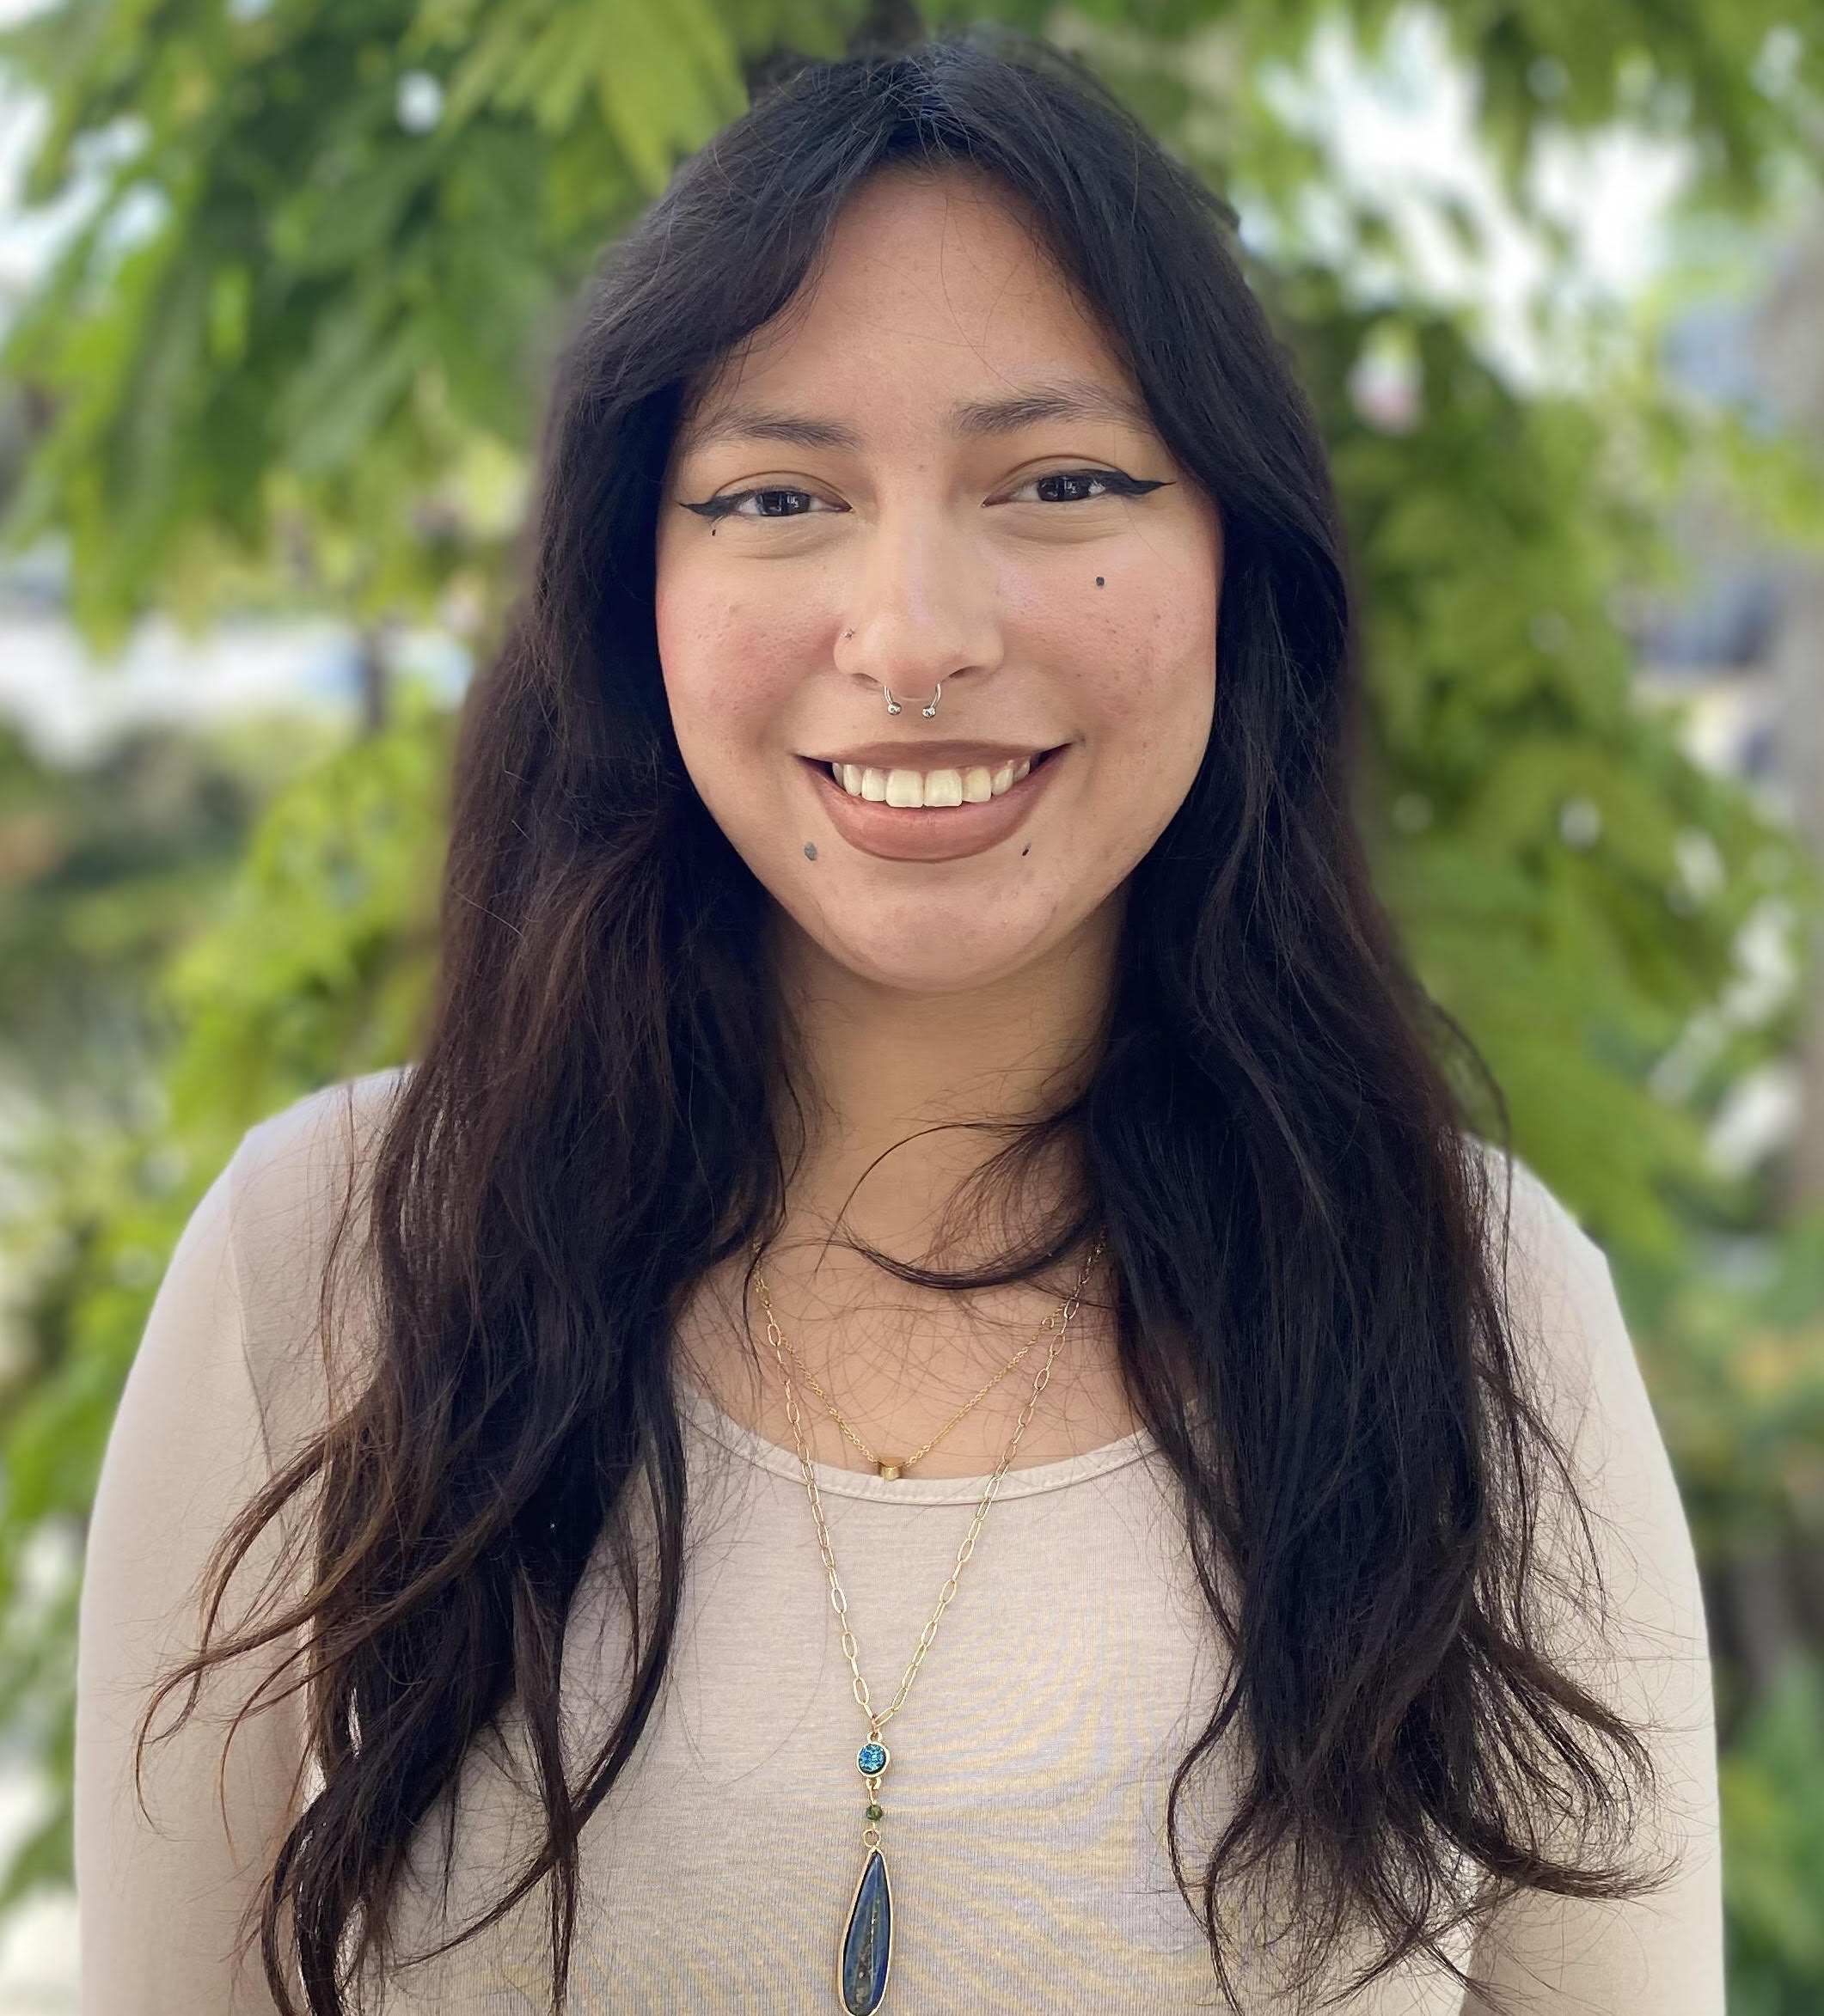 The Santa Barbara County Food Action Network (SBCFAN) is pleased to welcome Ashley Lopez Estrada as its first Community Liaison